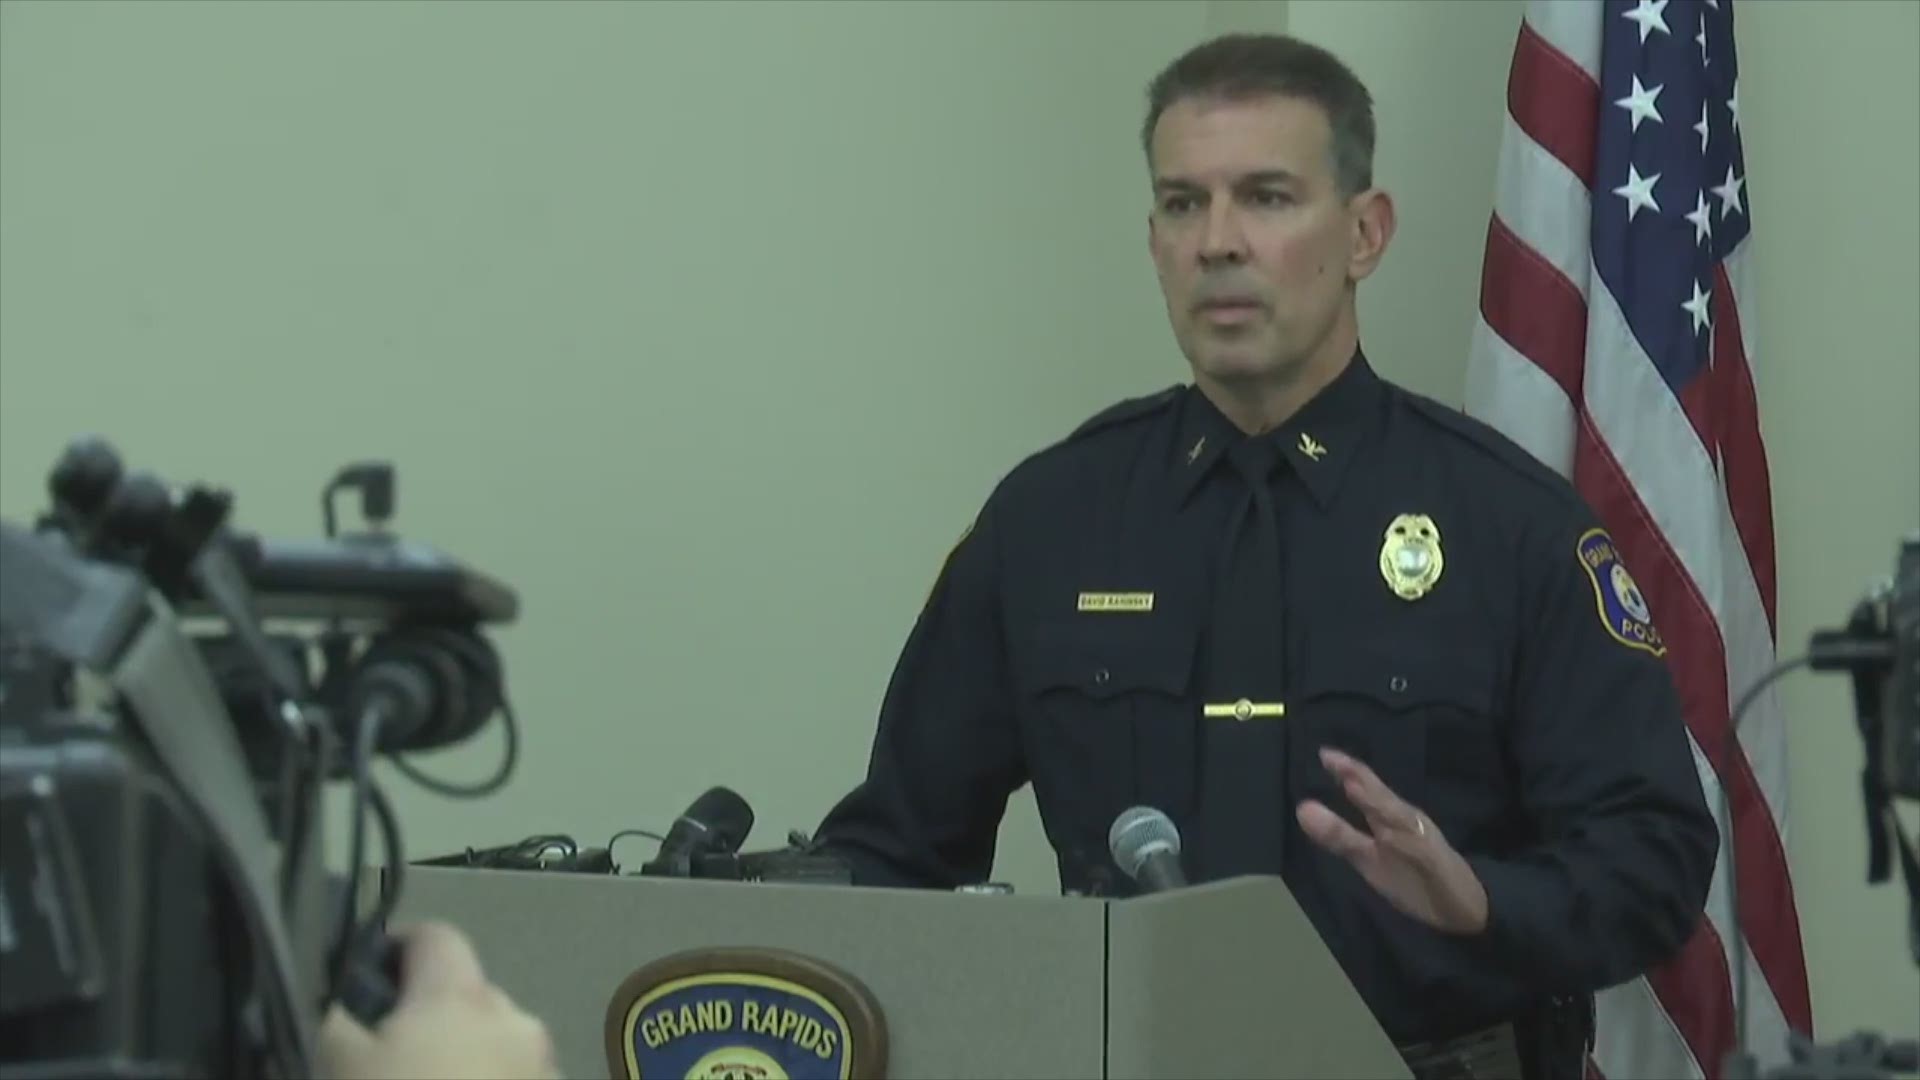 Grand Rapids Police Chief David Rahinsky responds to the child handcuffing incident. During the press conference, the department played the 911 call and showed officer body camera footage.